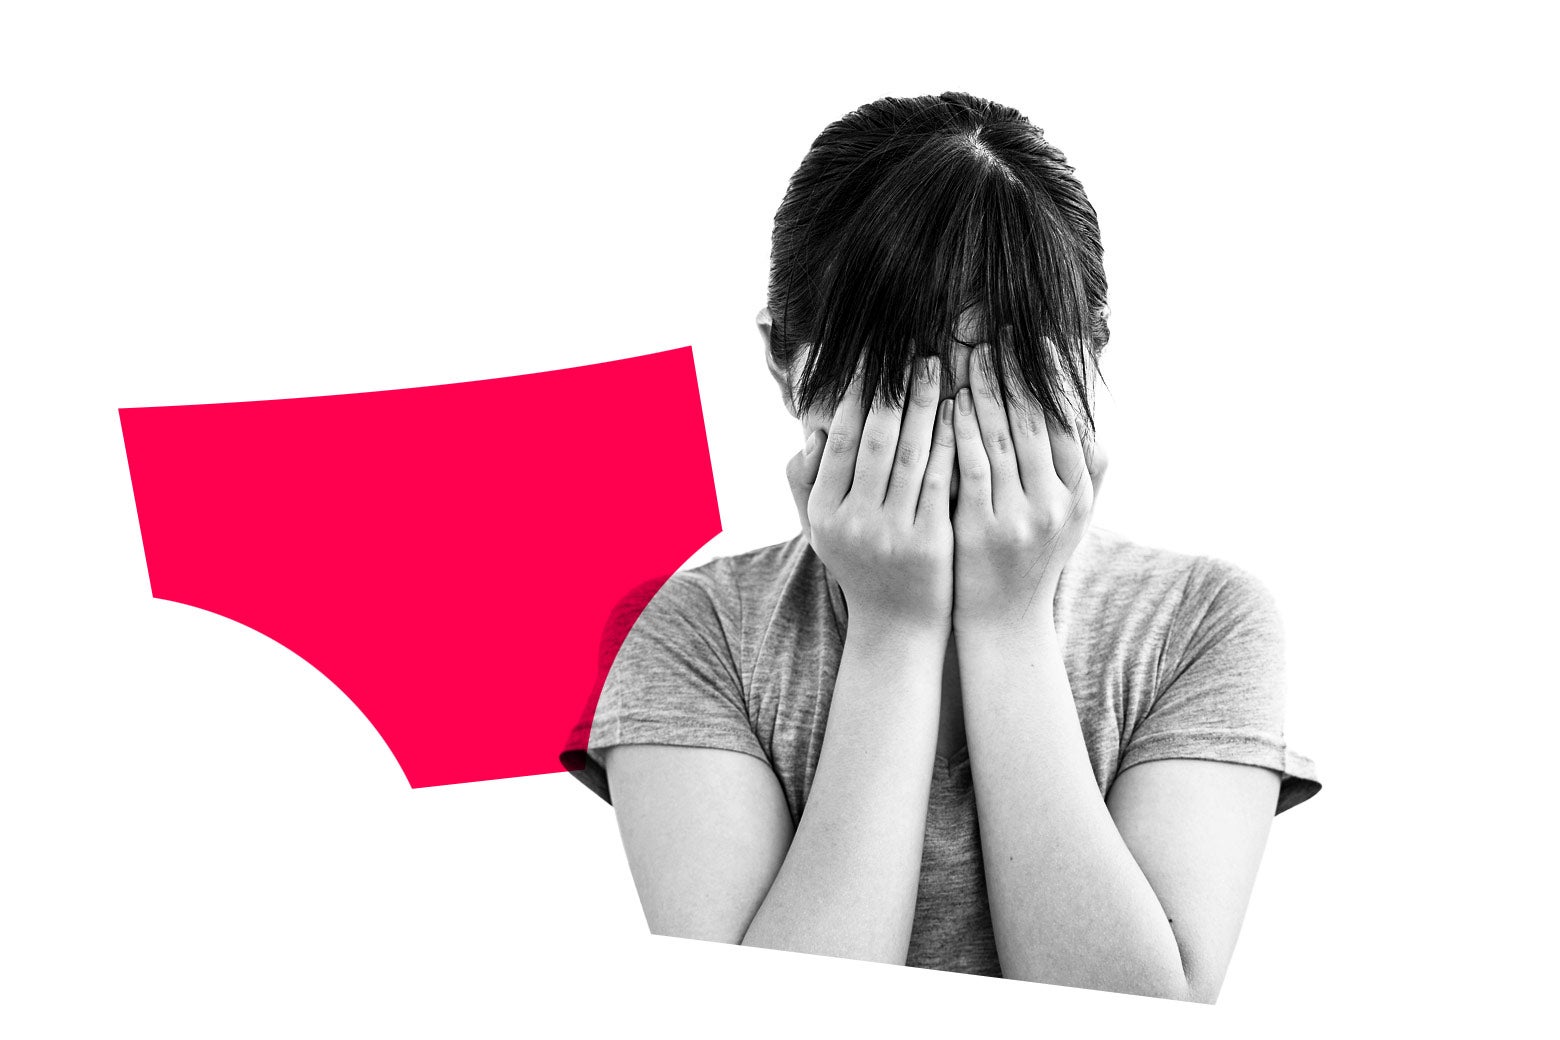 A graphic of underwear, and a woman covering her face.